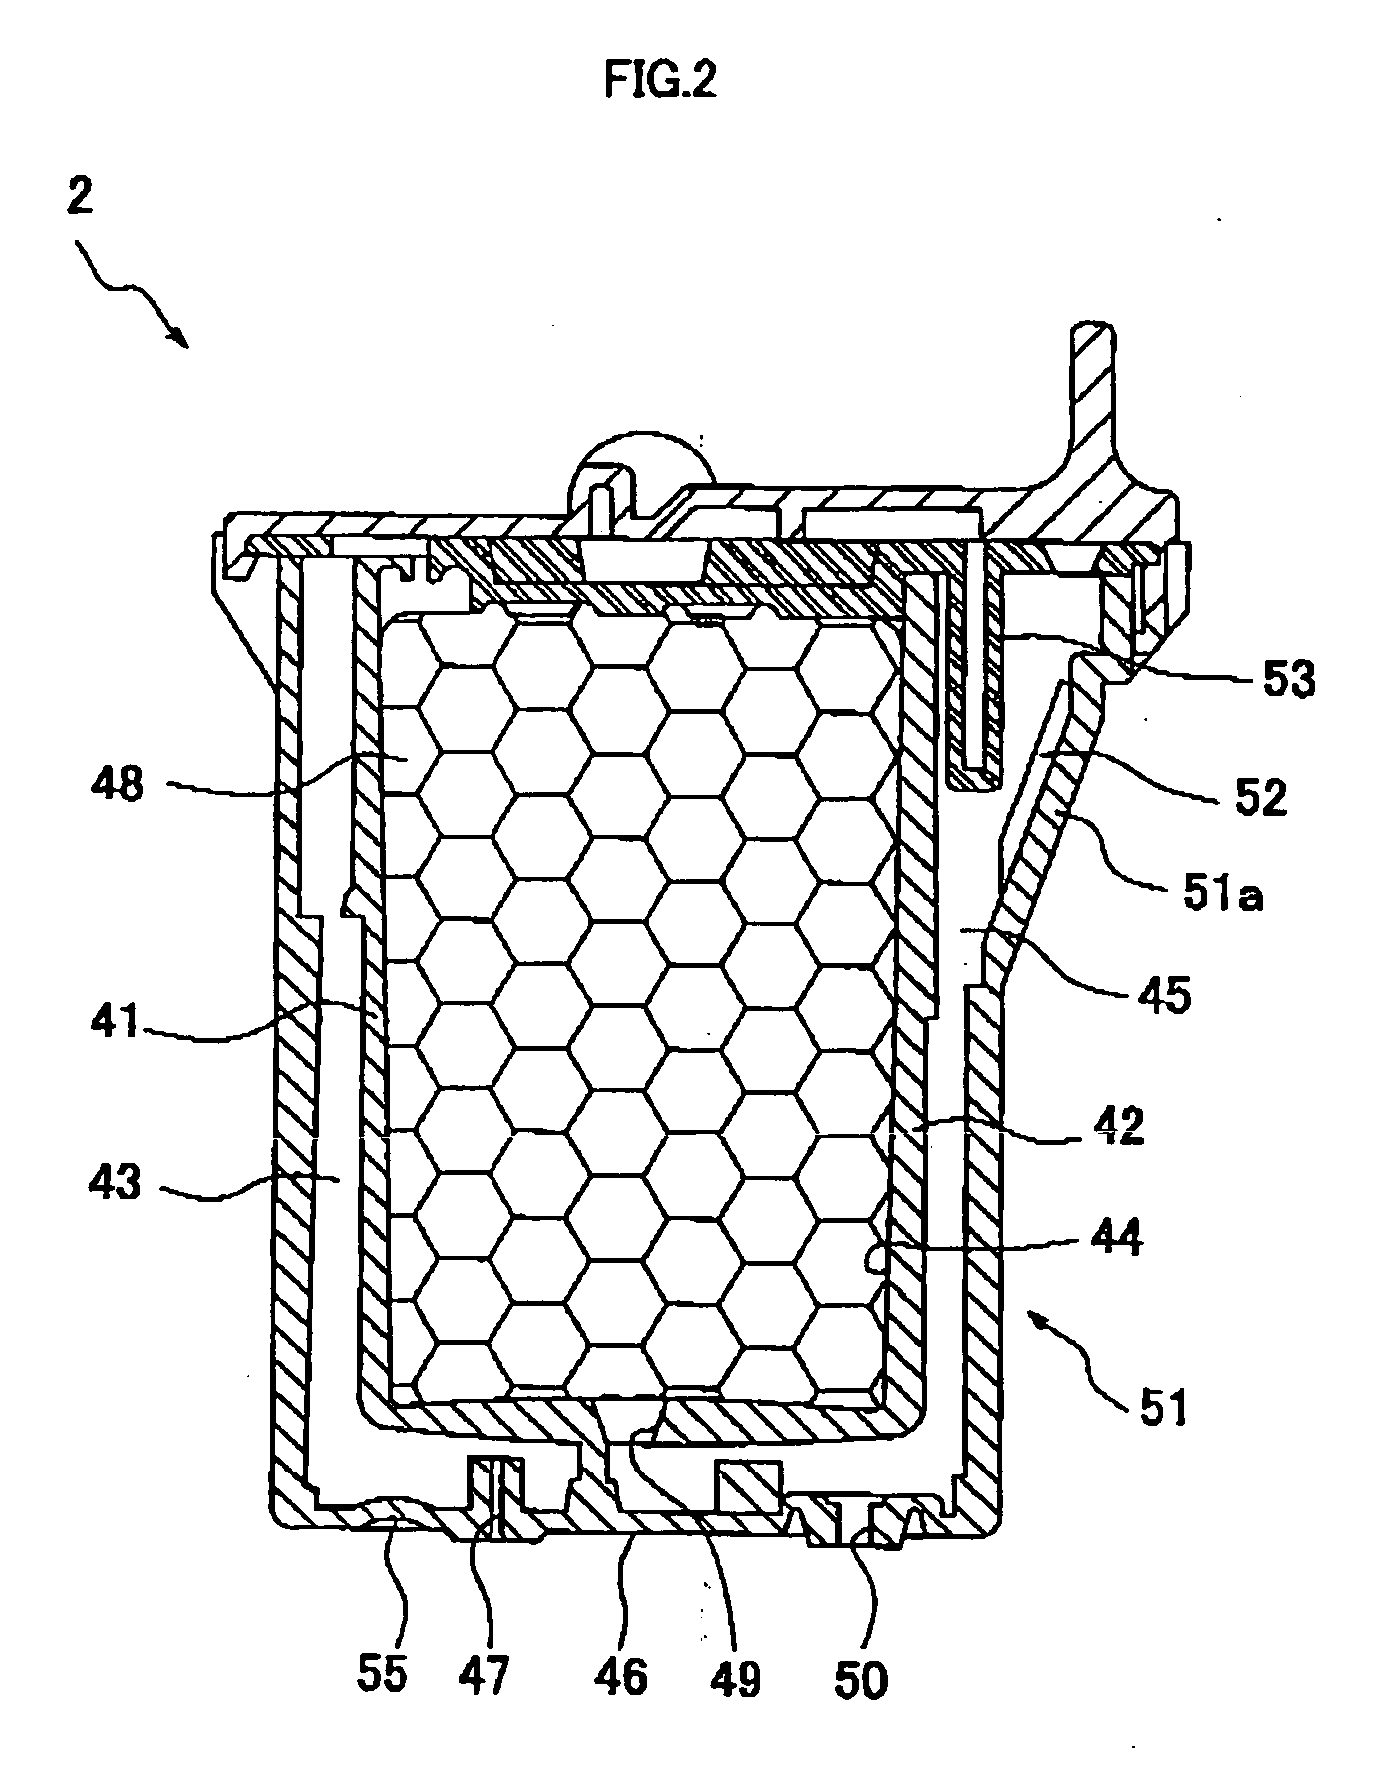 Ink cartridge, detection device for cartridge identification and ink level detection, and image formation apparatus comprising thereof